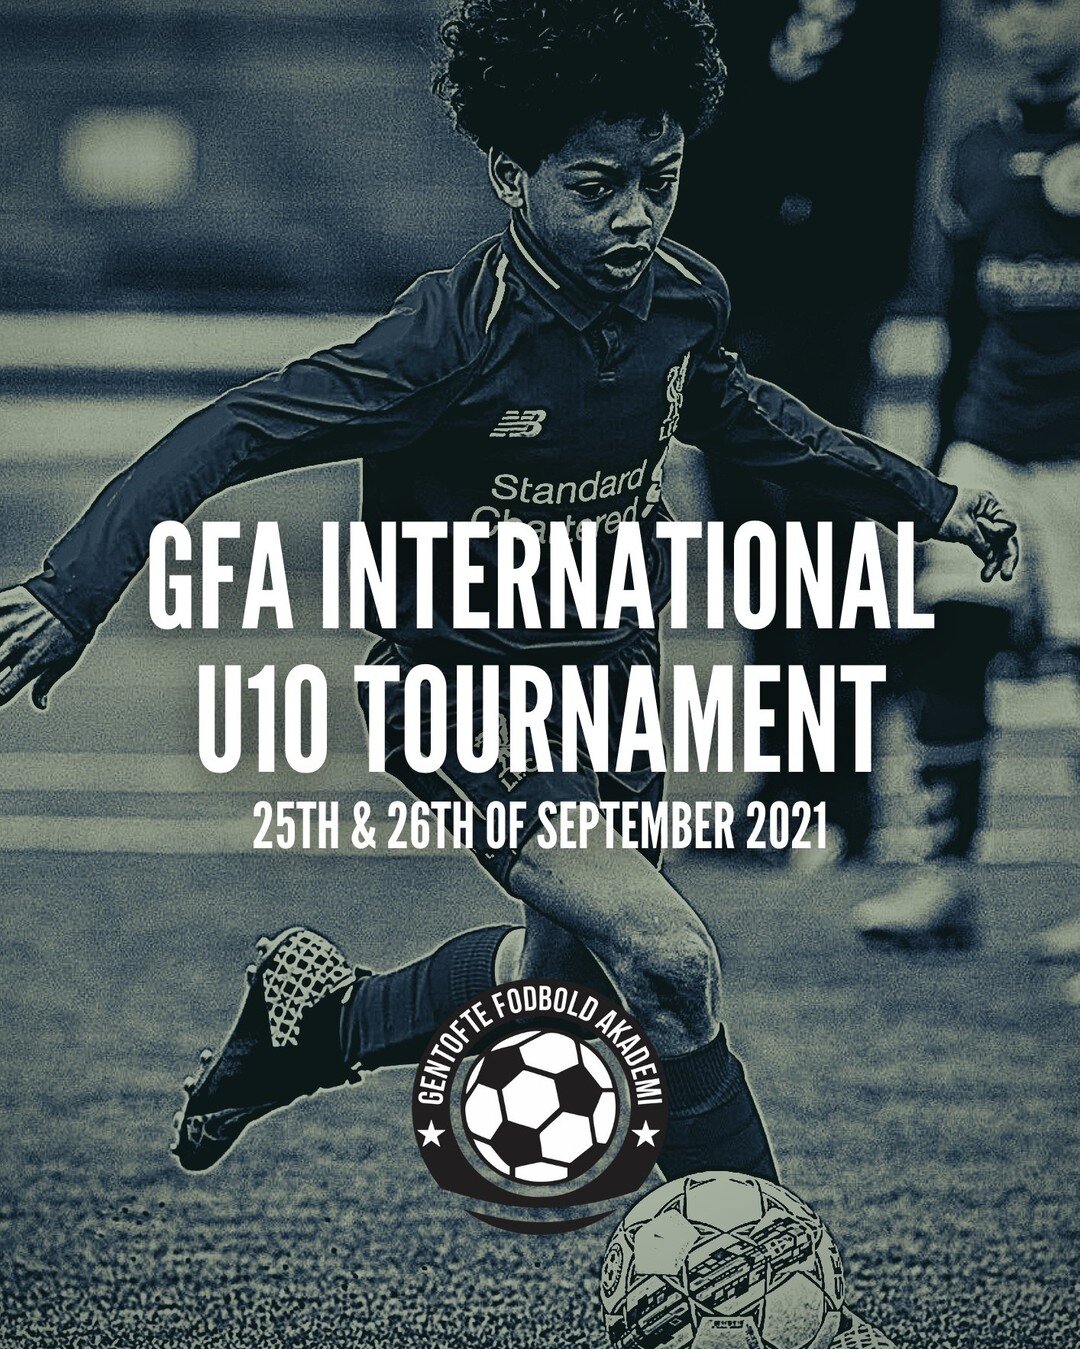 'We have a dream' ⚽️🧡

The planning for our 2nd International U10 Tournament in September 2021 is well under way. Additional information will follow shortly! 👀